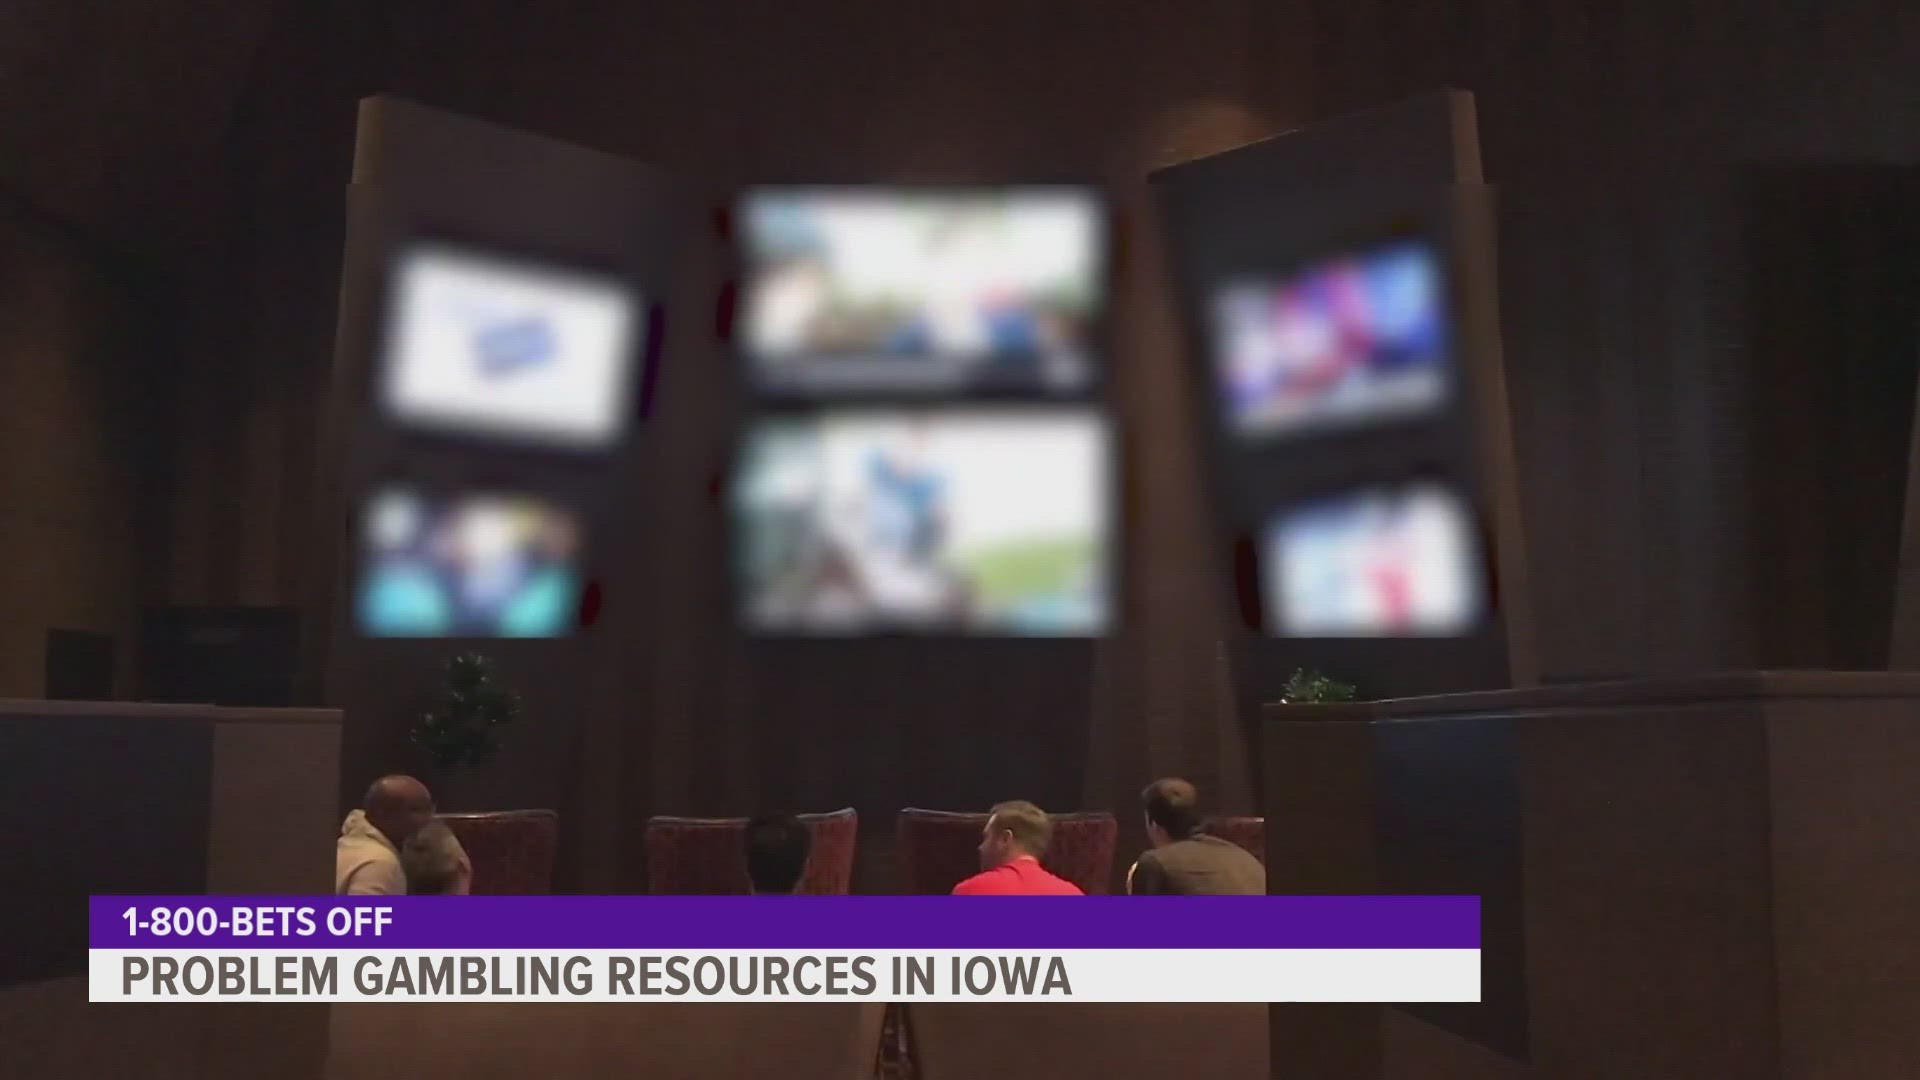 With March Madness bringing basketball bets to the forefront of conversation, some Iowa gambling resources are making sure those who need help can access it.